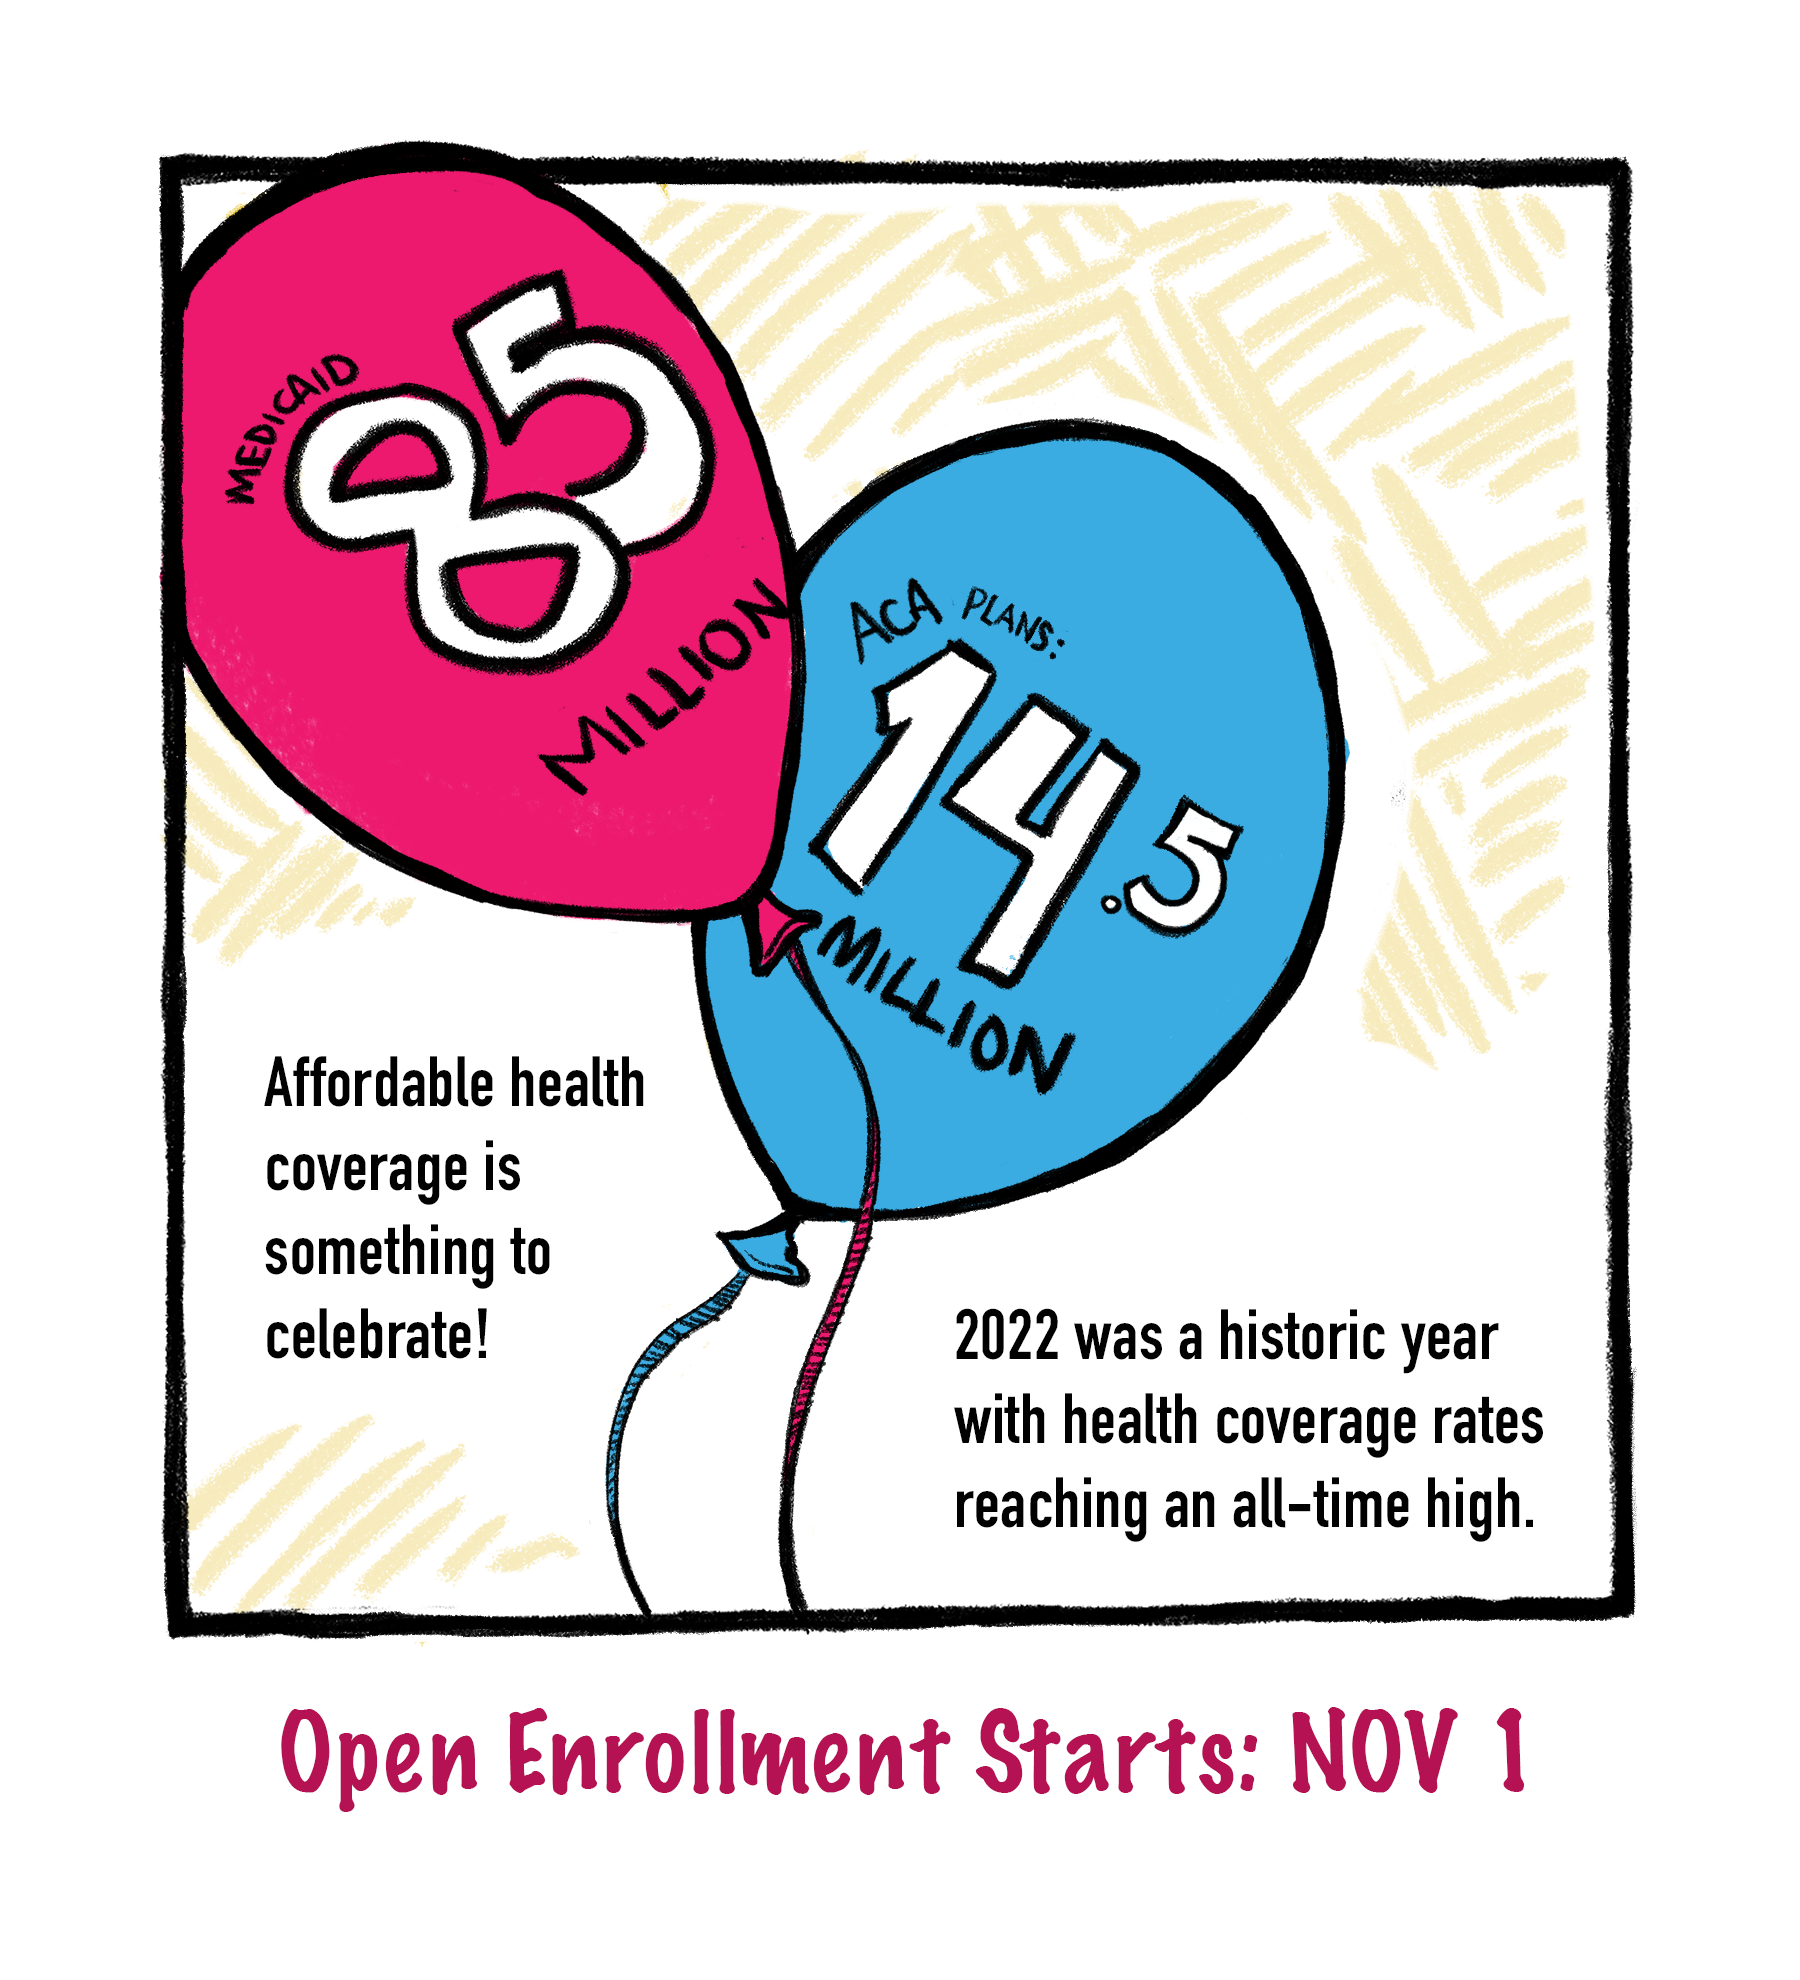 A comic showing two balloons labeled: "Medicaid - 85 Million" and "ACA Plans - 14.5 Million". Reads: "Affordable health coverage is something to celebrate! 2022 was a historic year with health coverage rates reaching an all-time high." Open Enrollment starts November 1st.